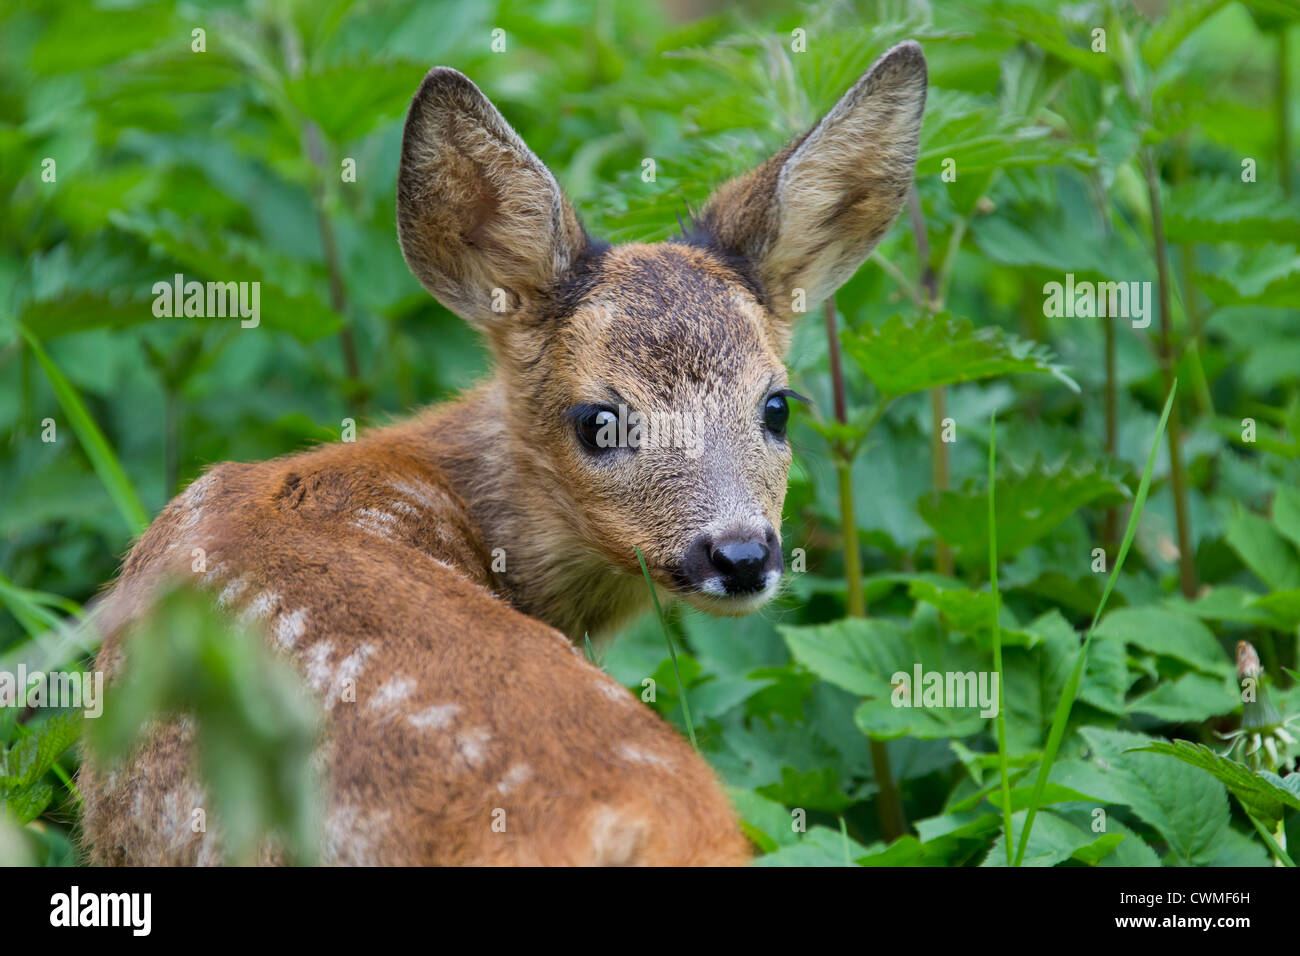 Roe deer (Capreolus capreolus) fawn among vegetation in forest's edge, Germany Stock Photo